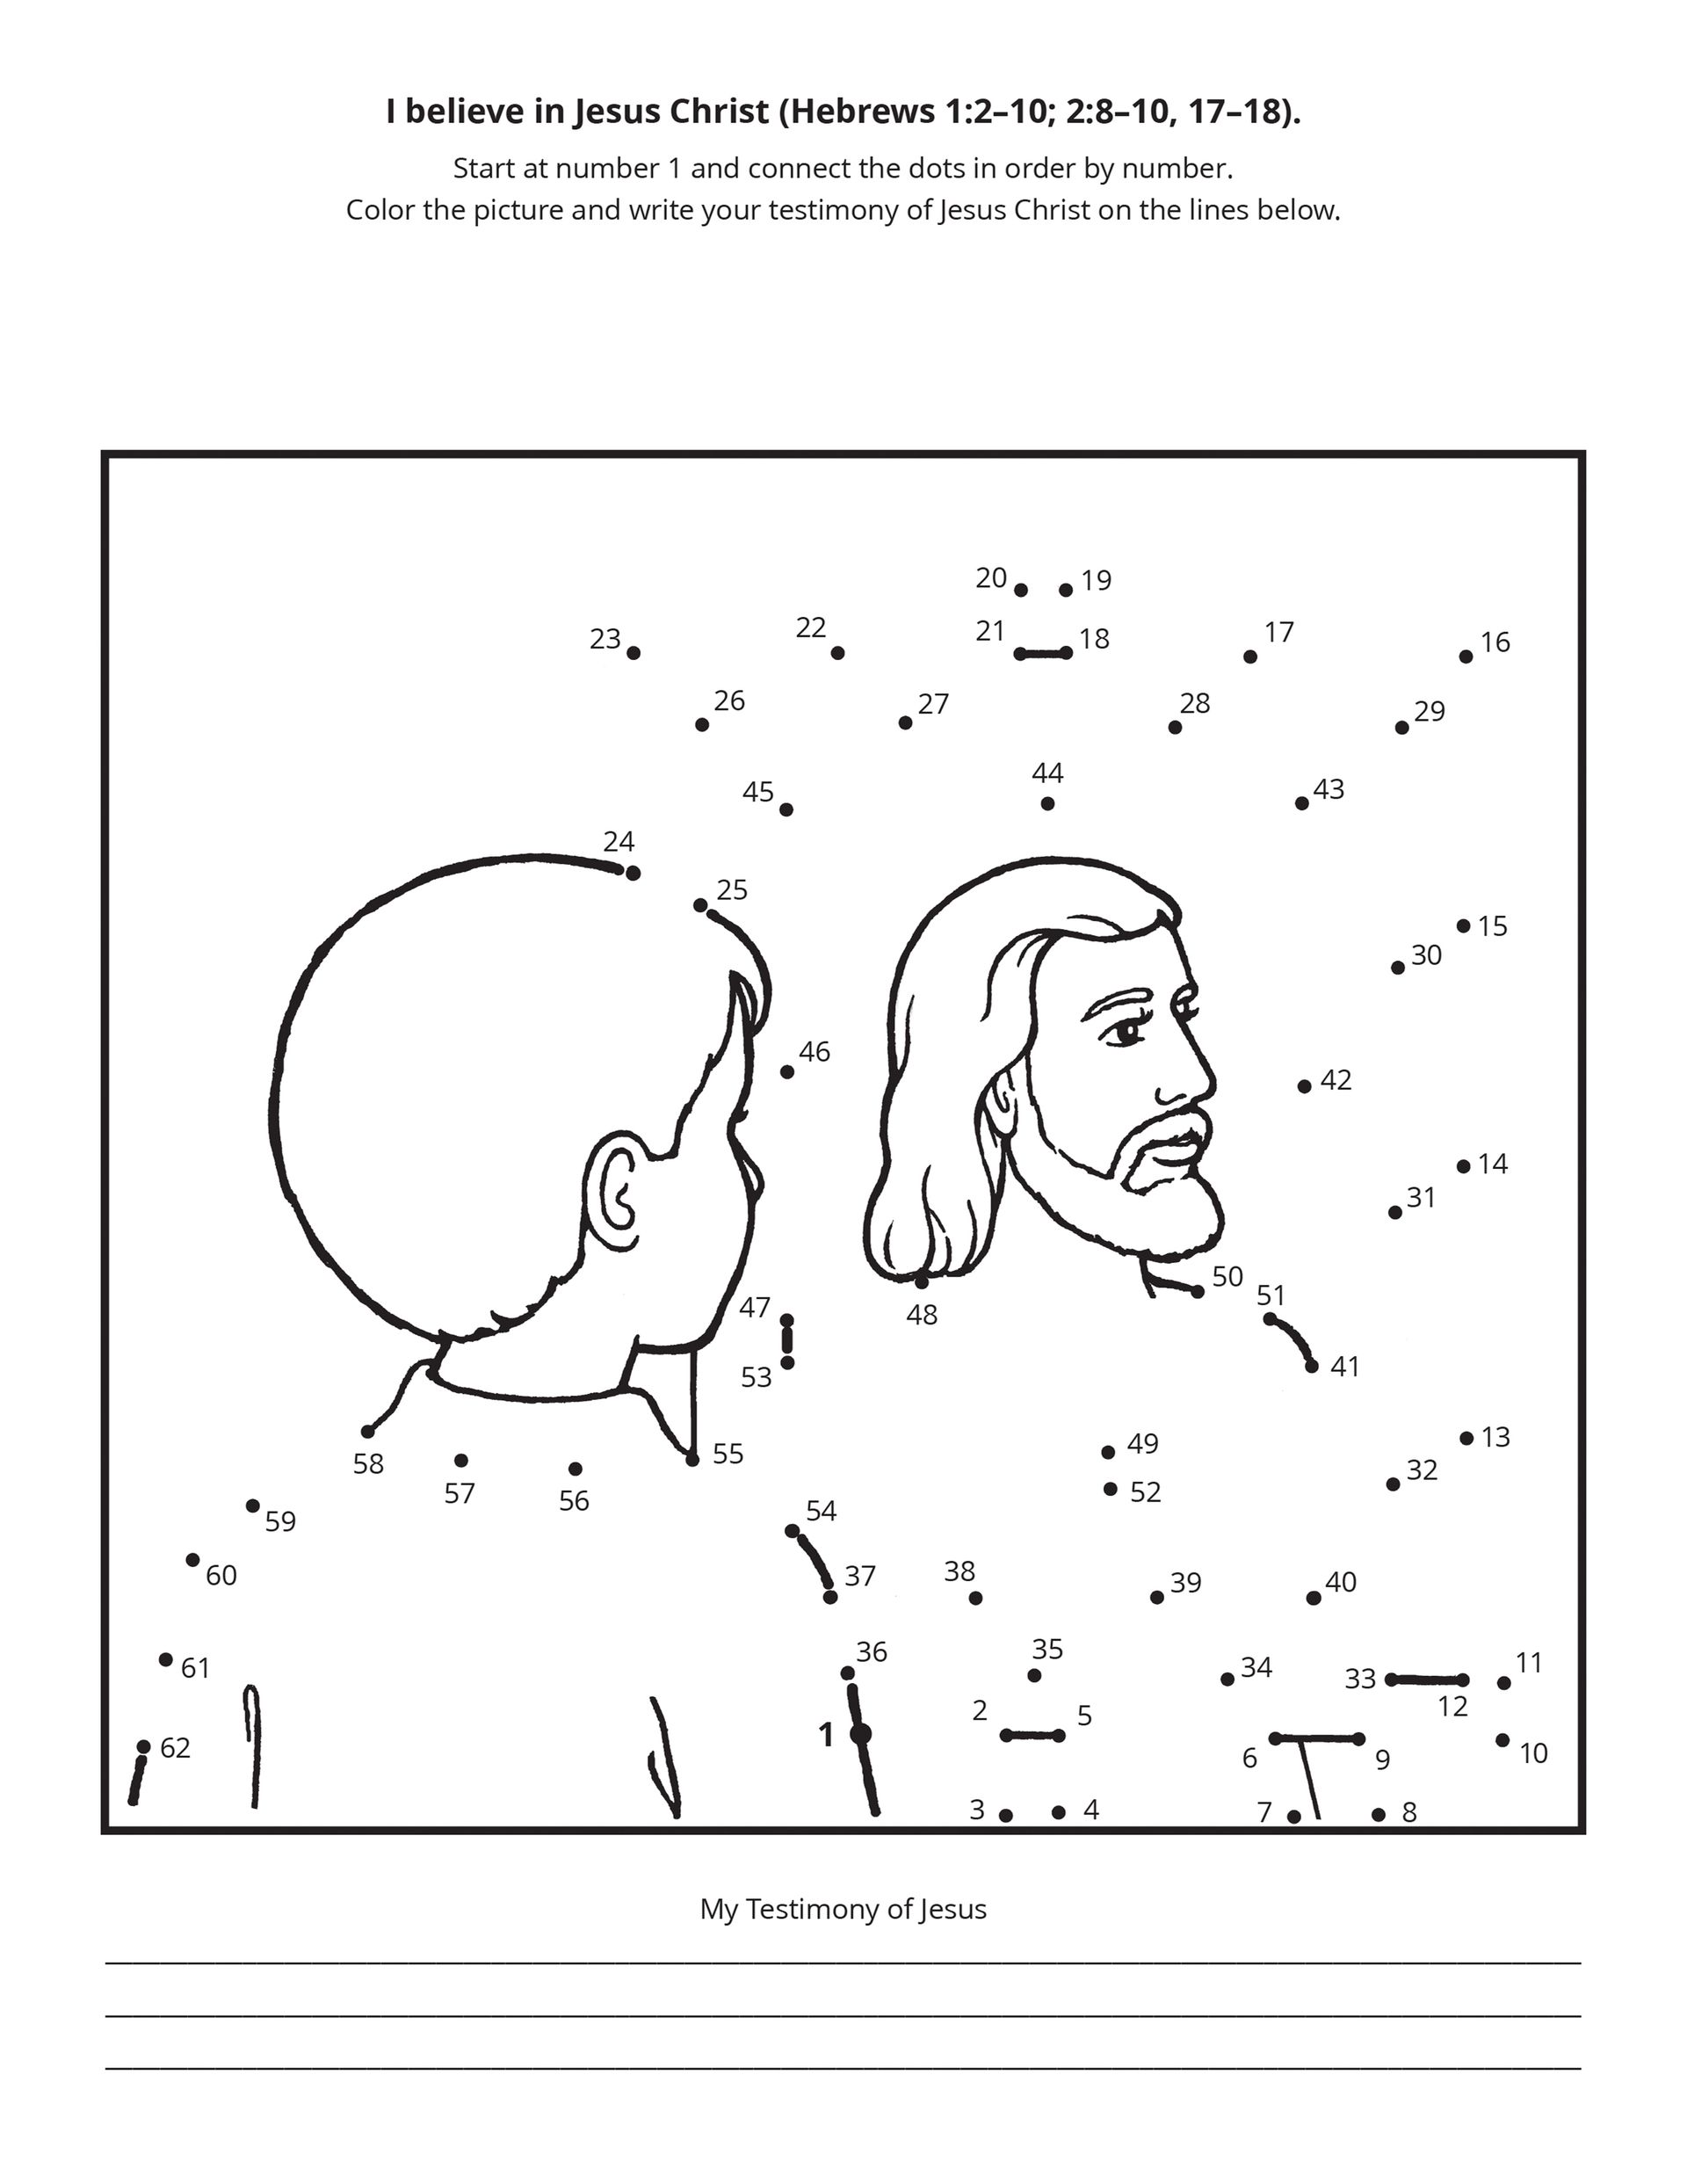 A connect-the-dots activity with a boy looking at Christ.